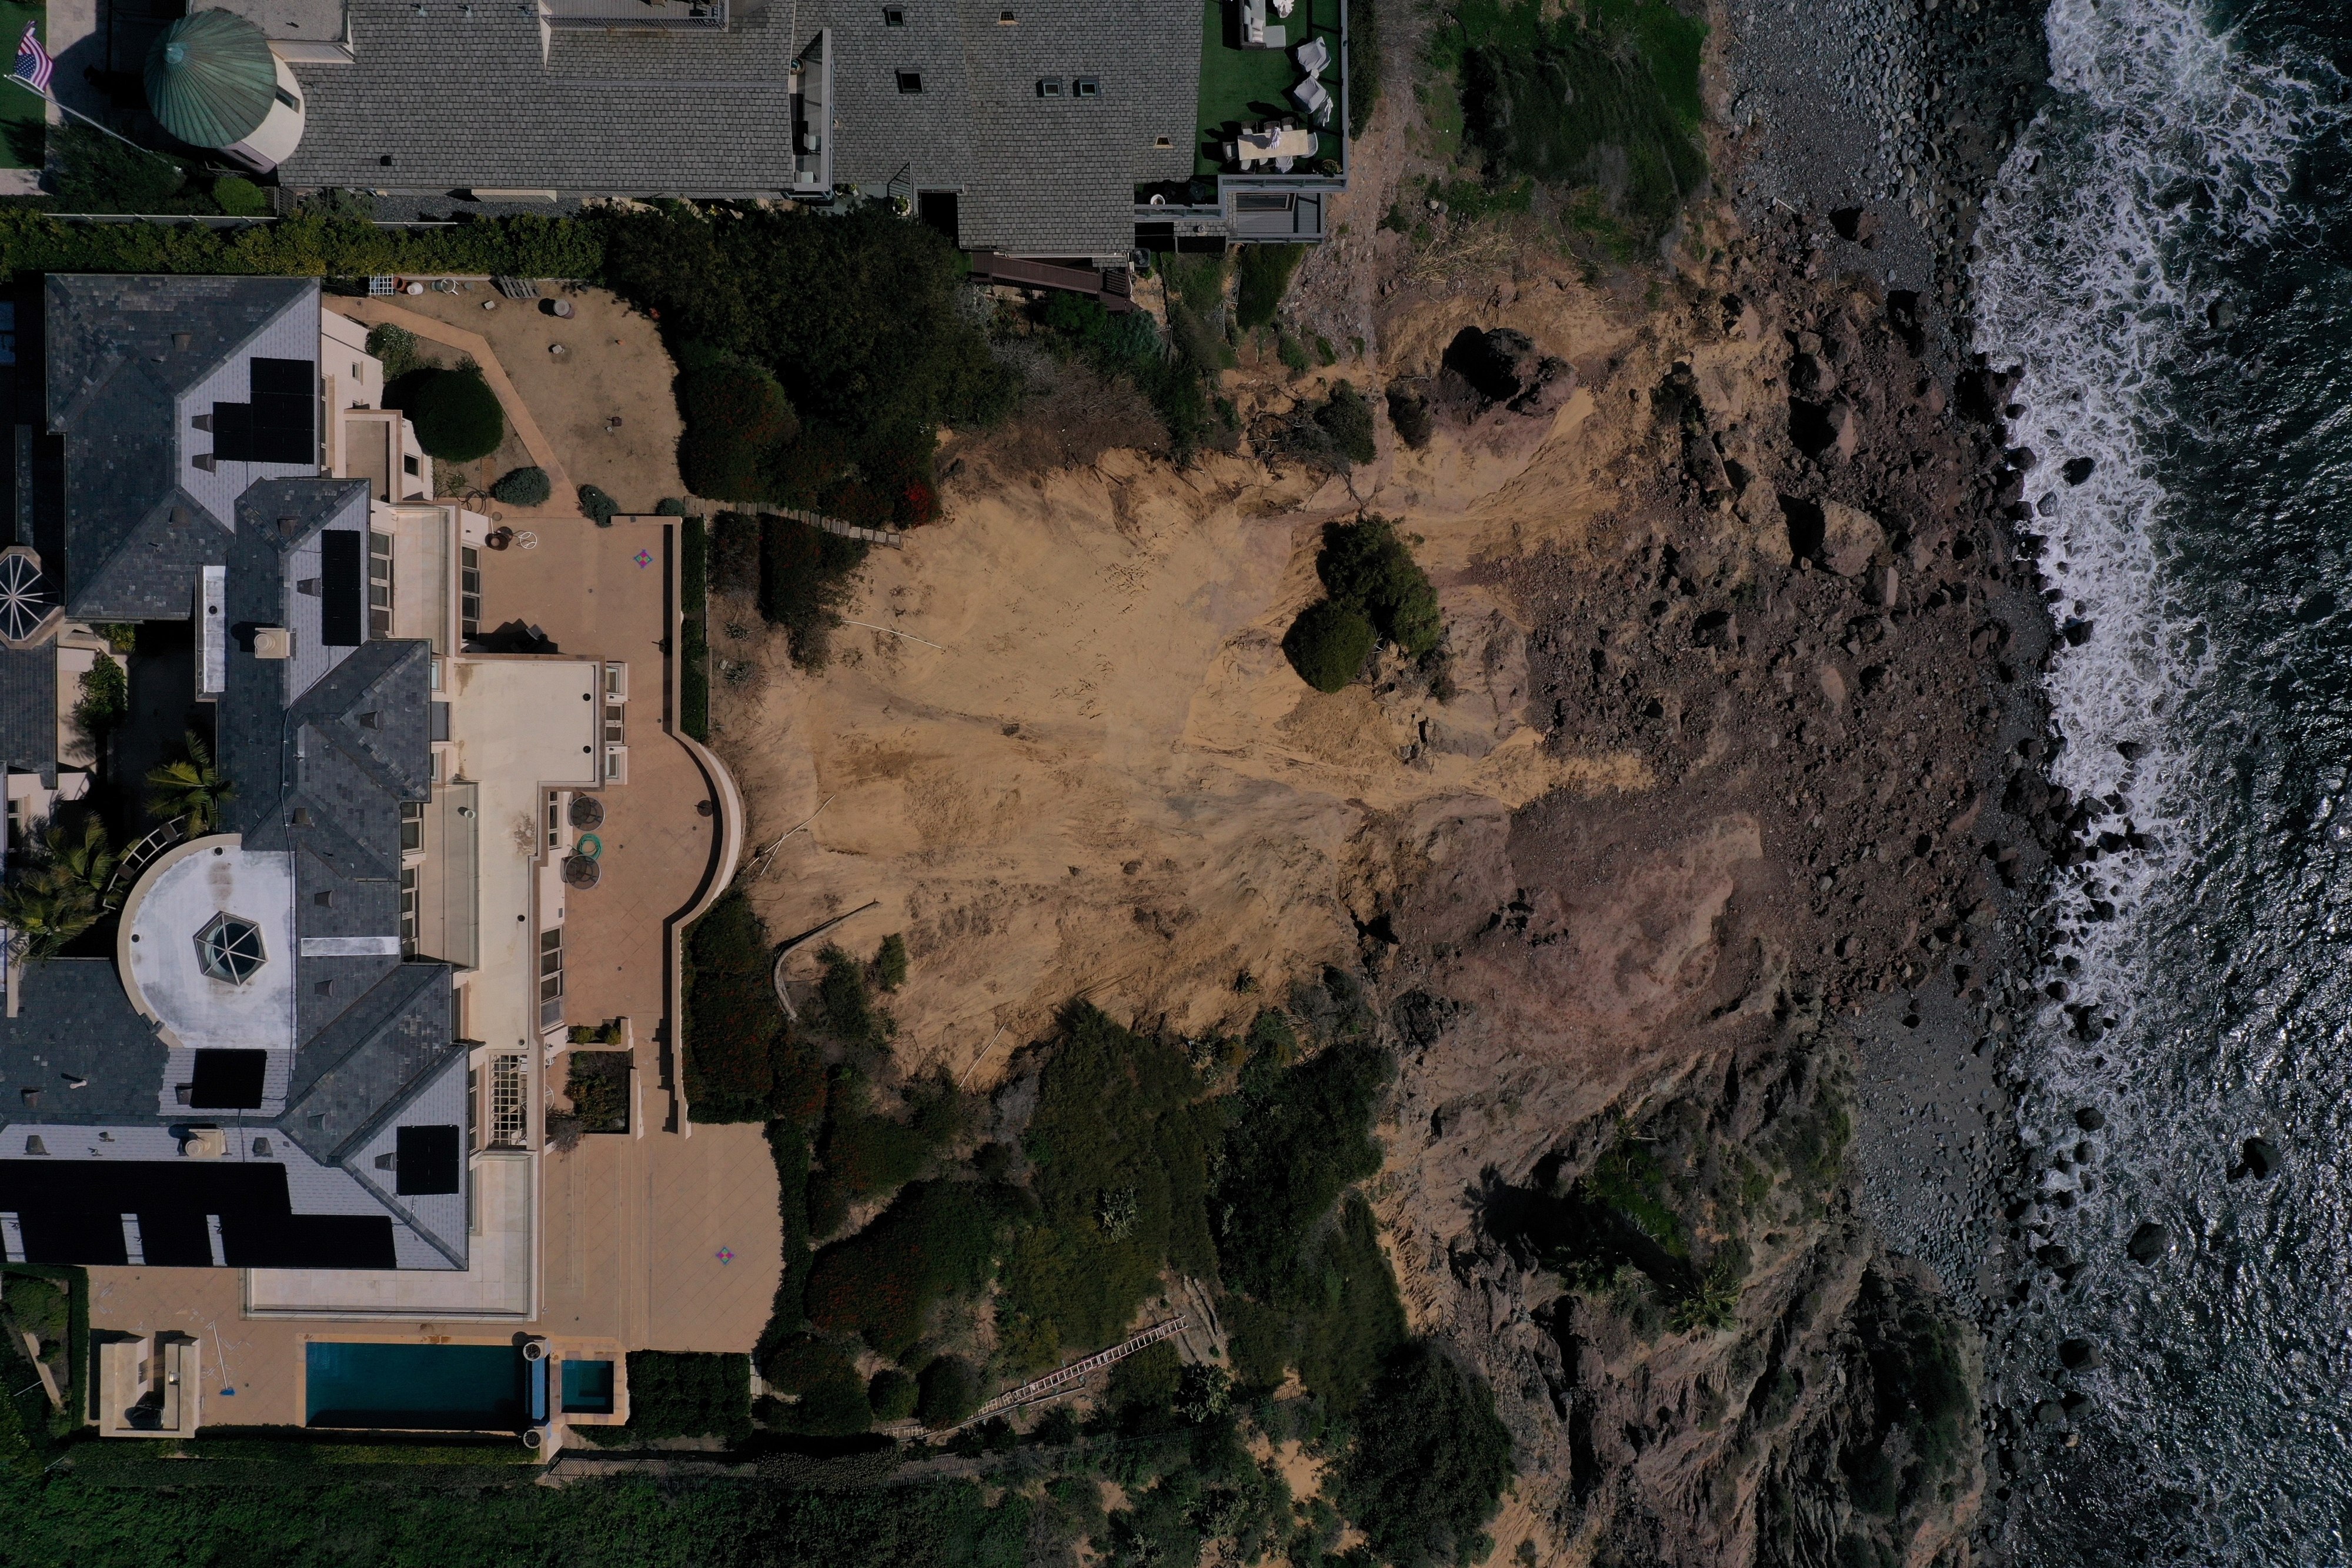 Aerial view of a coastal home next to a large landslide area